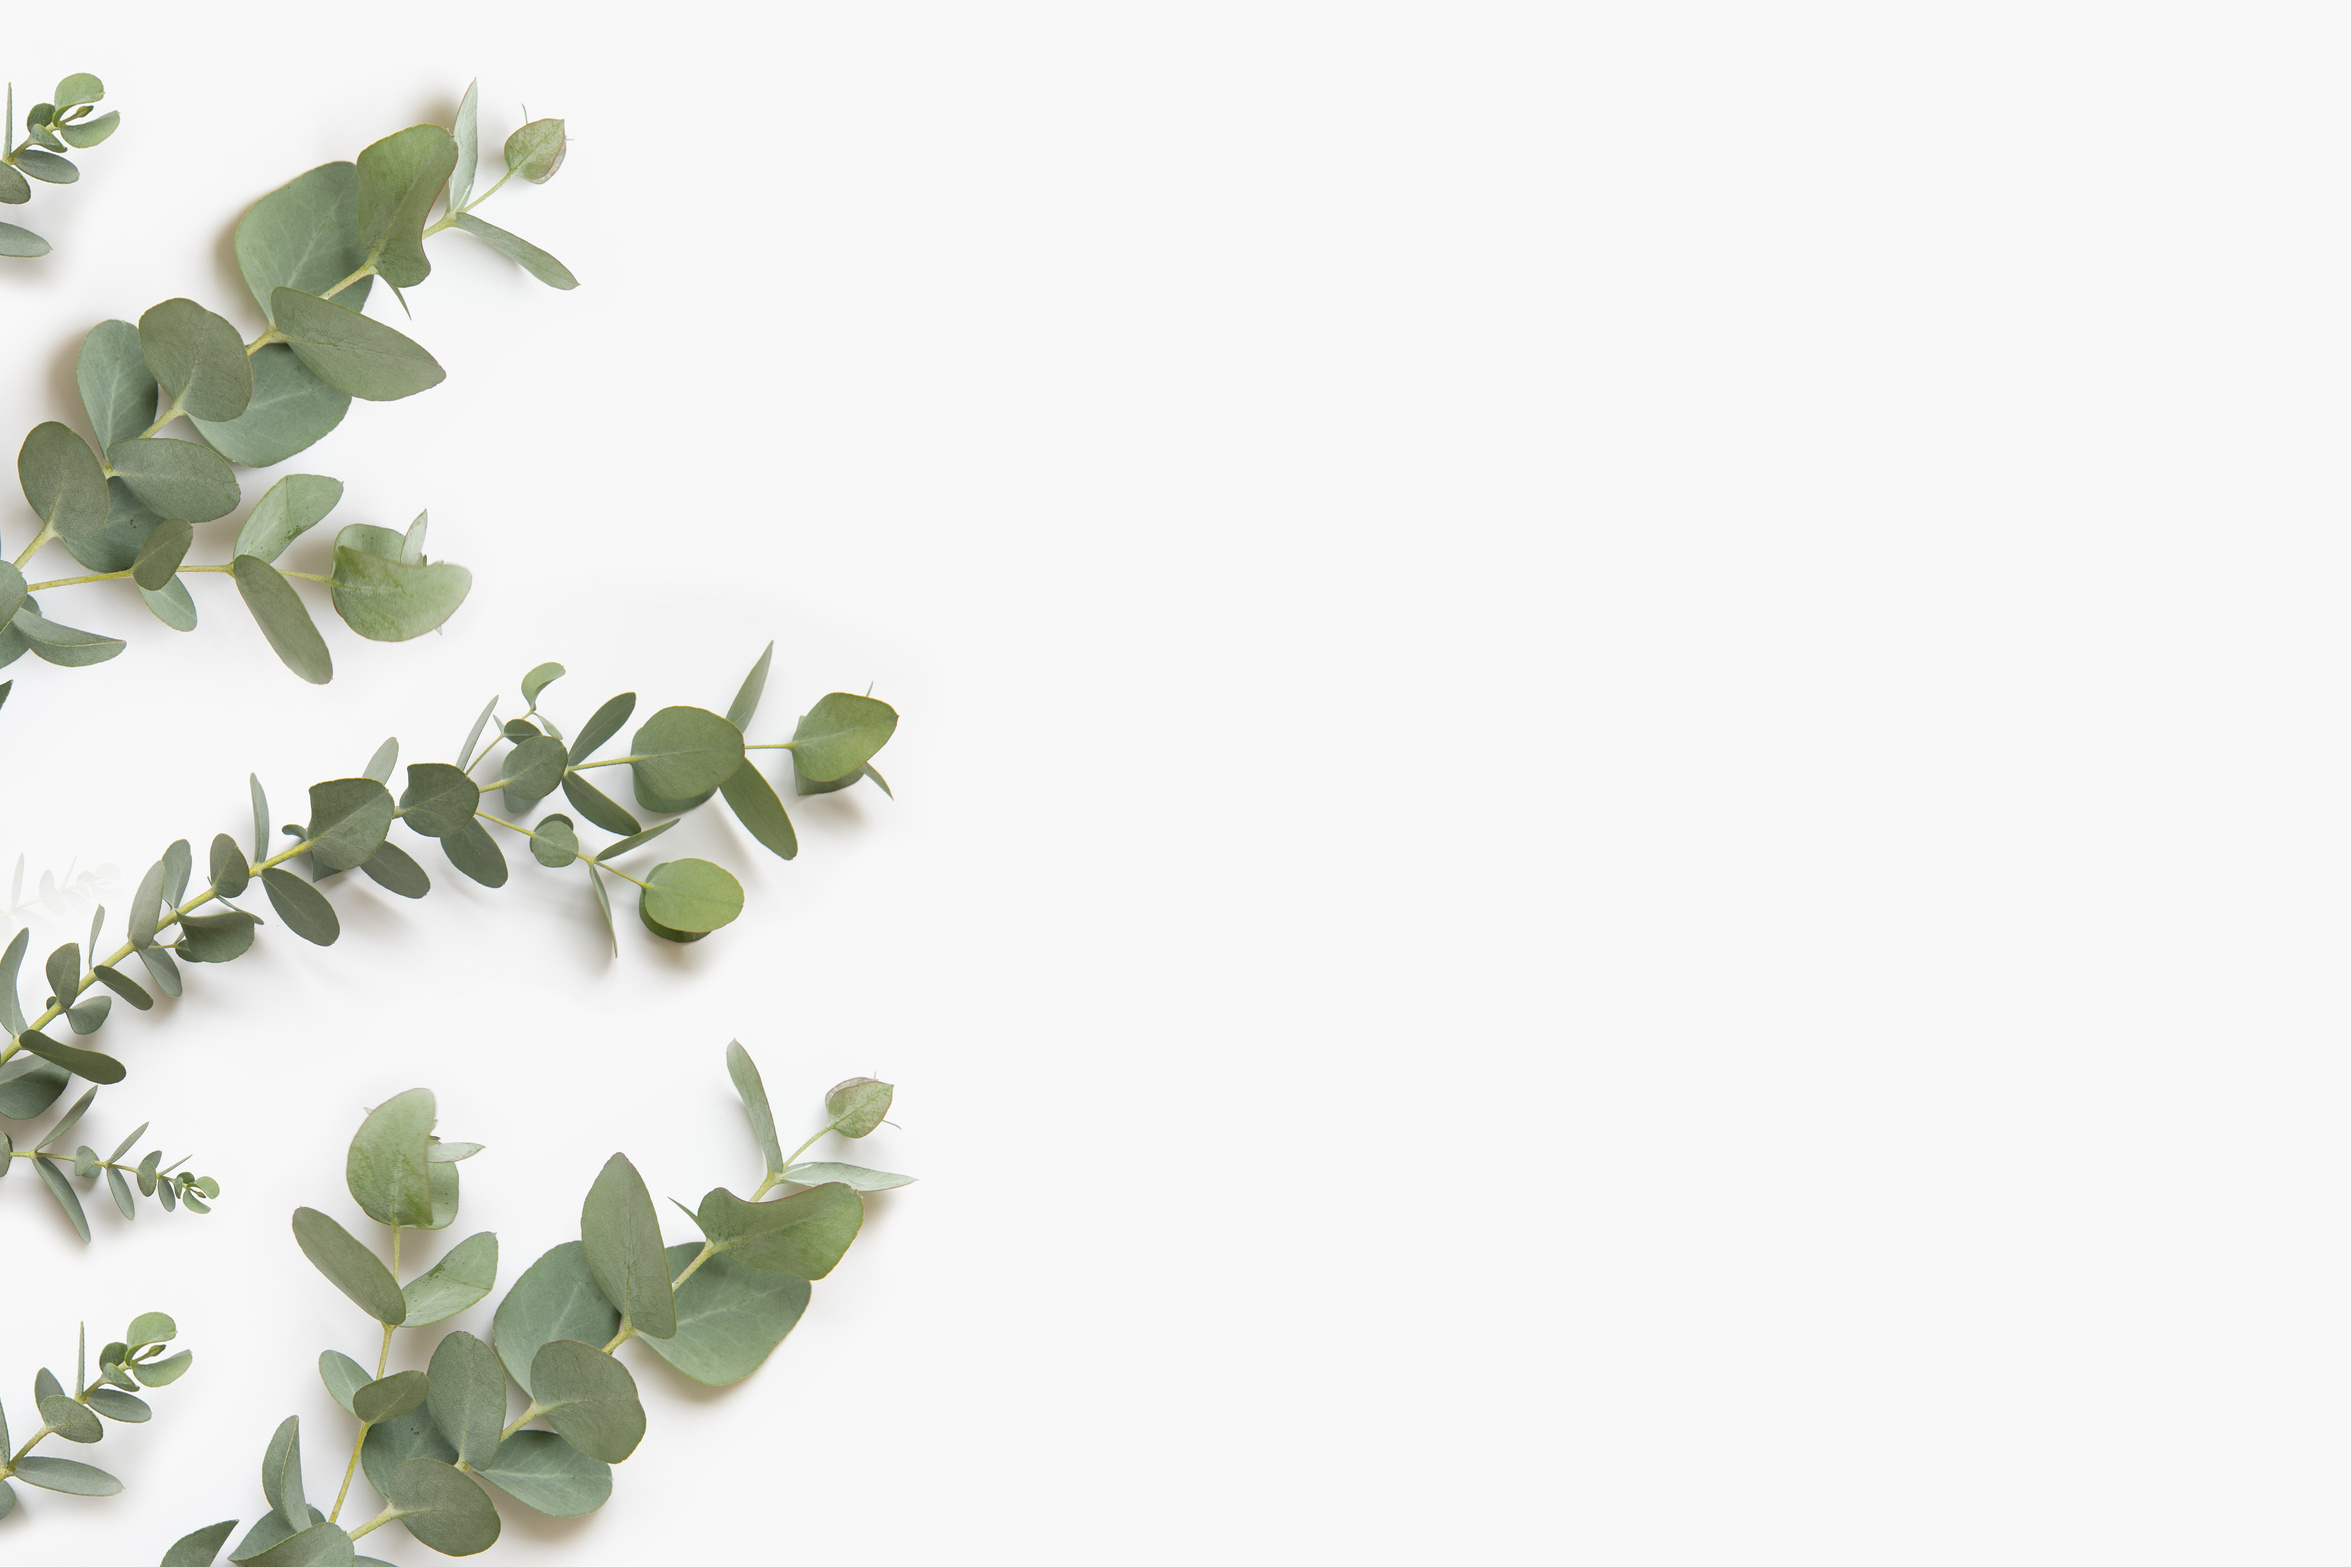 Green Leaves of Eucalyptus Branches on a White Background.